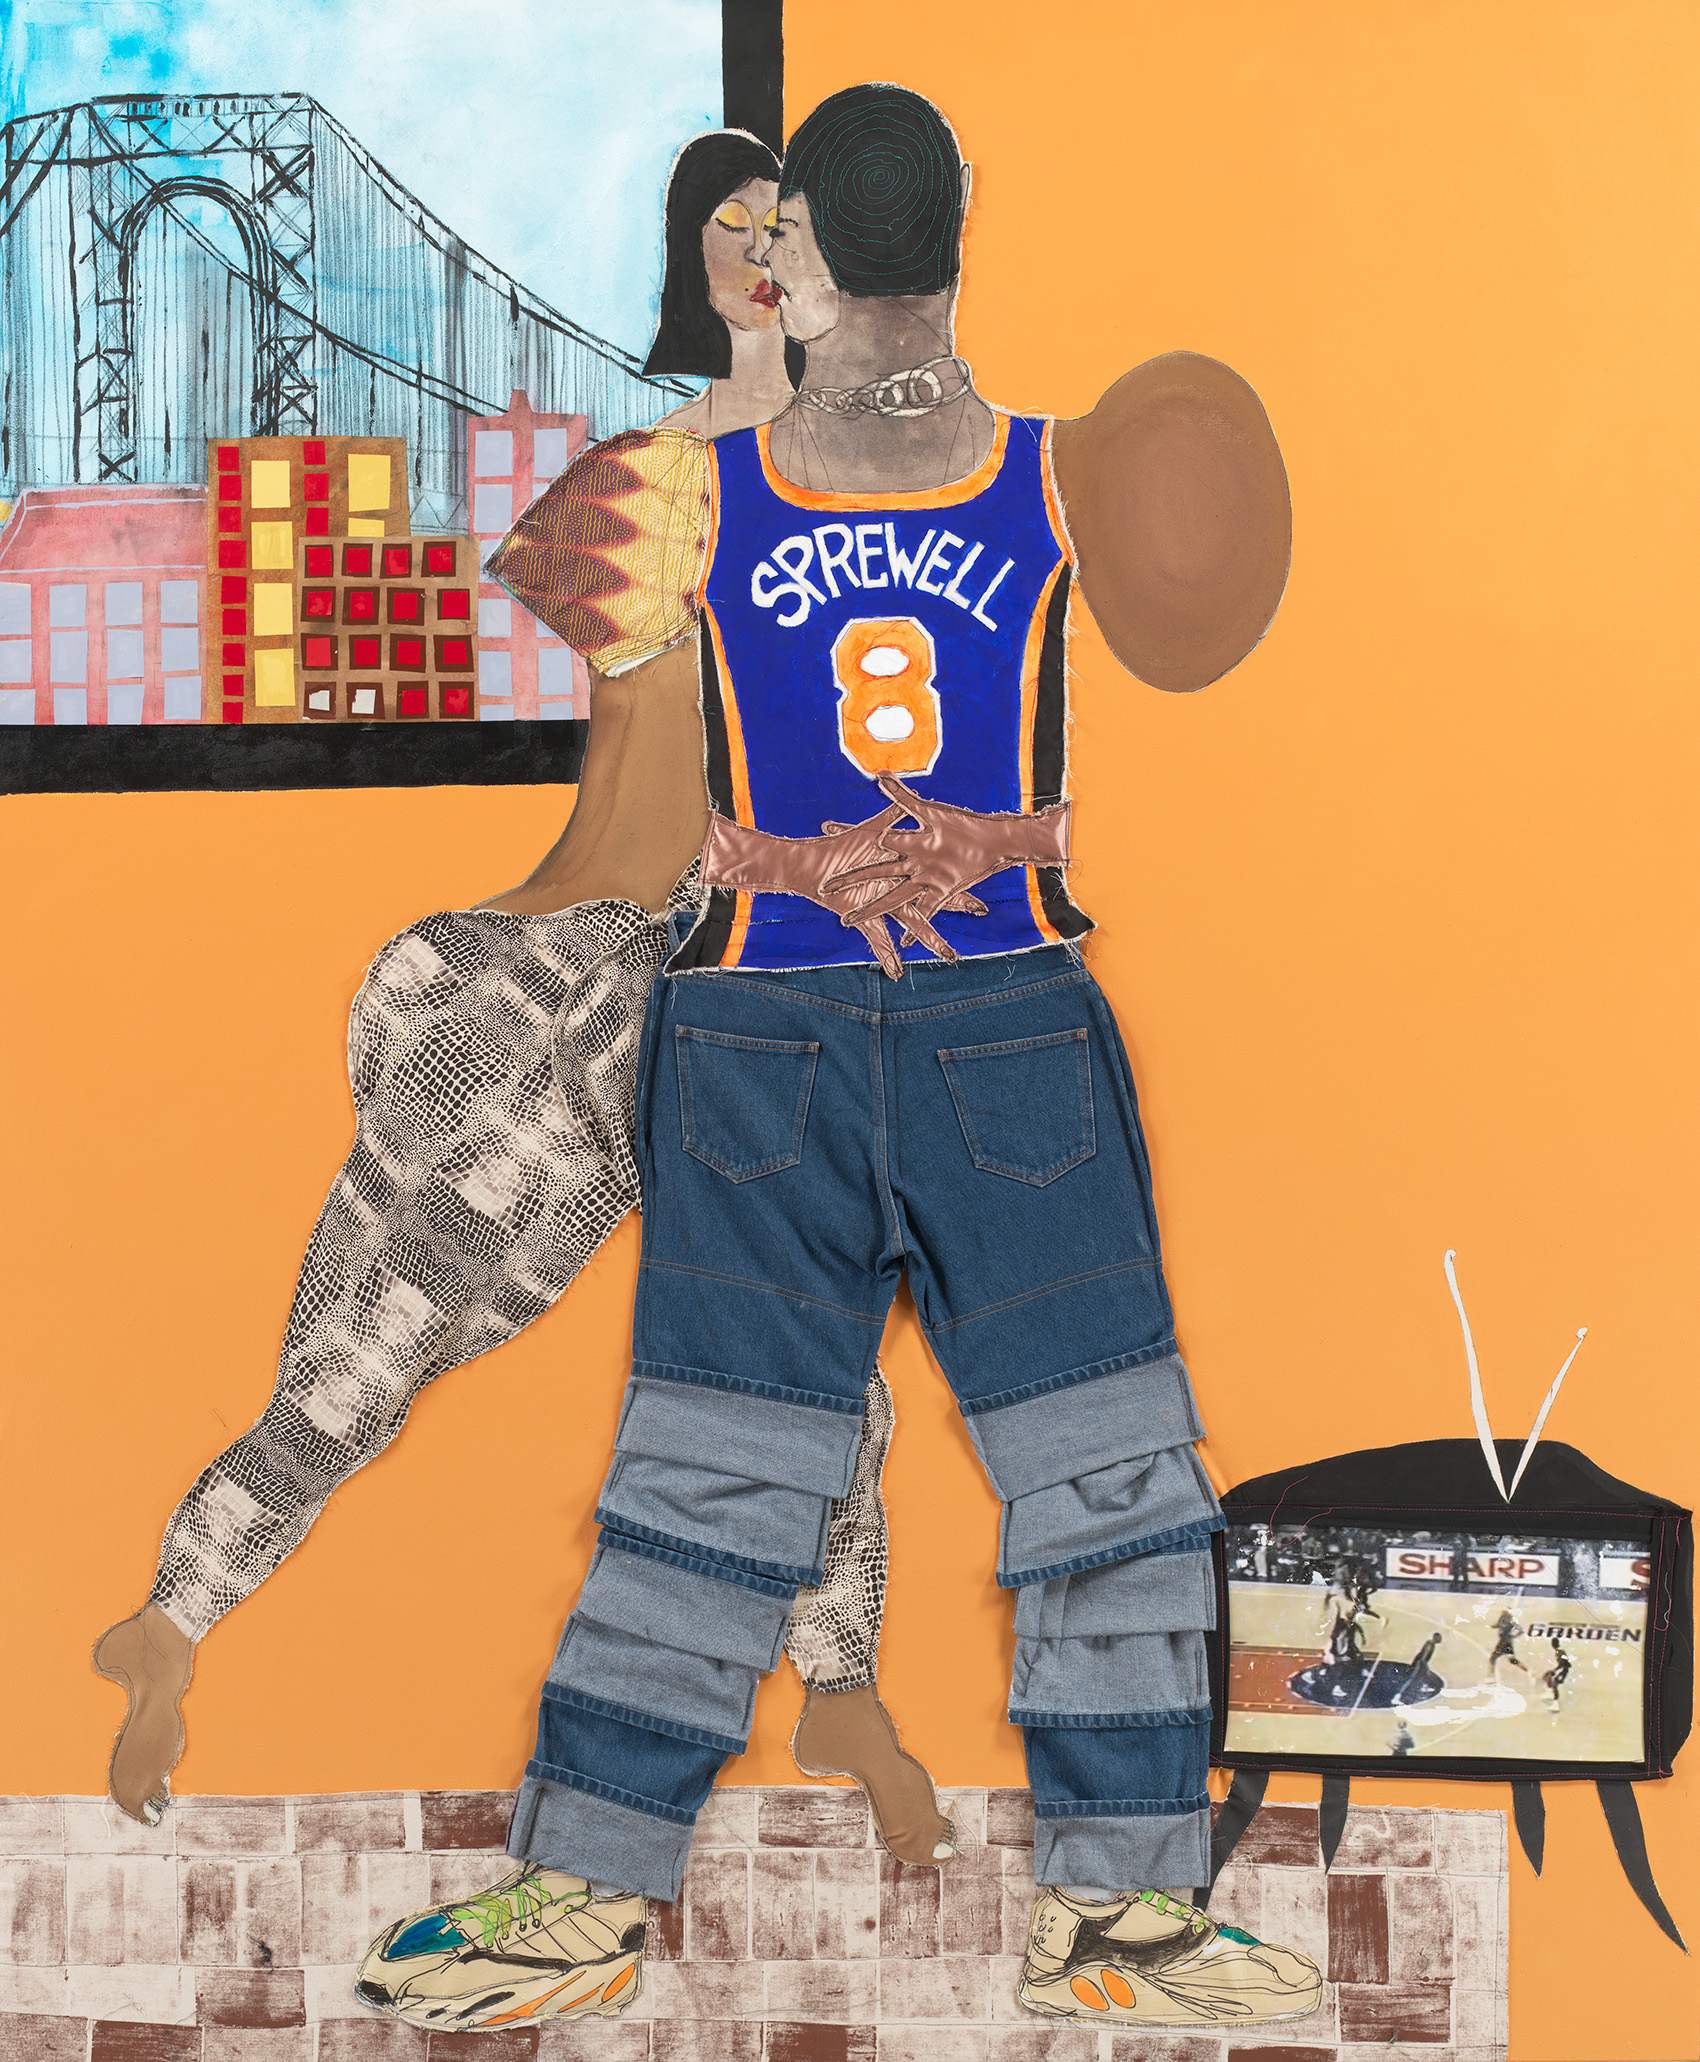 Collage piece showing two people embracing in a room with the city in the background